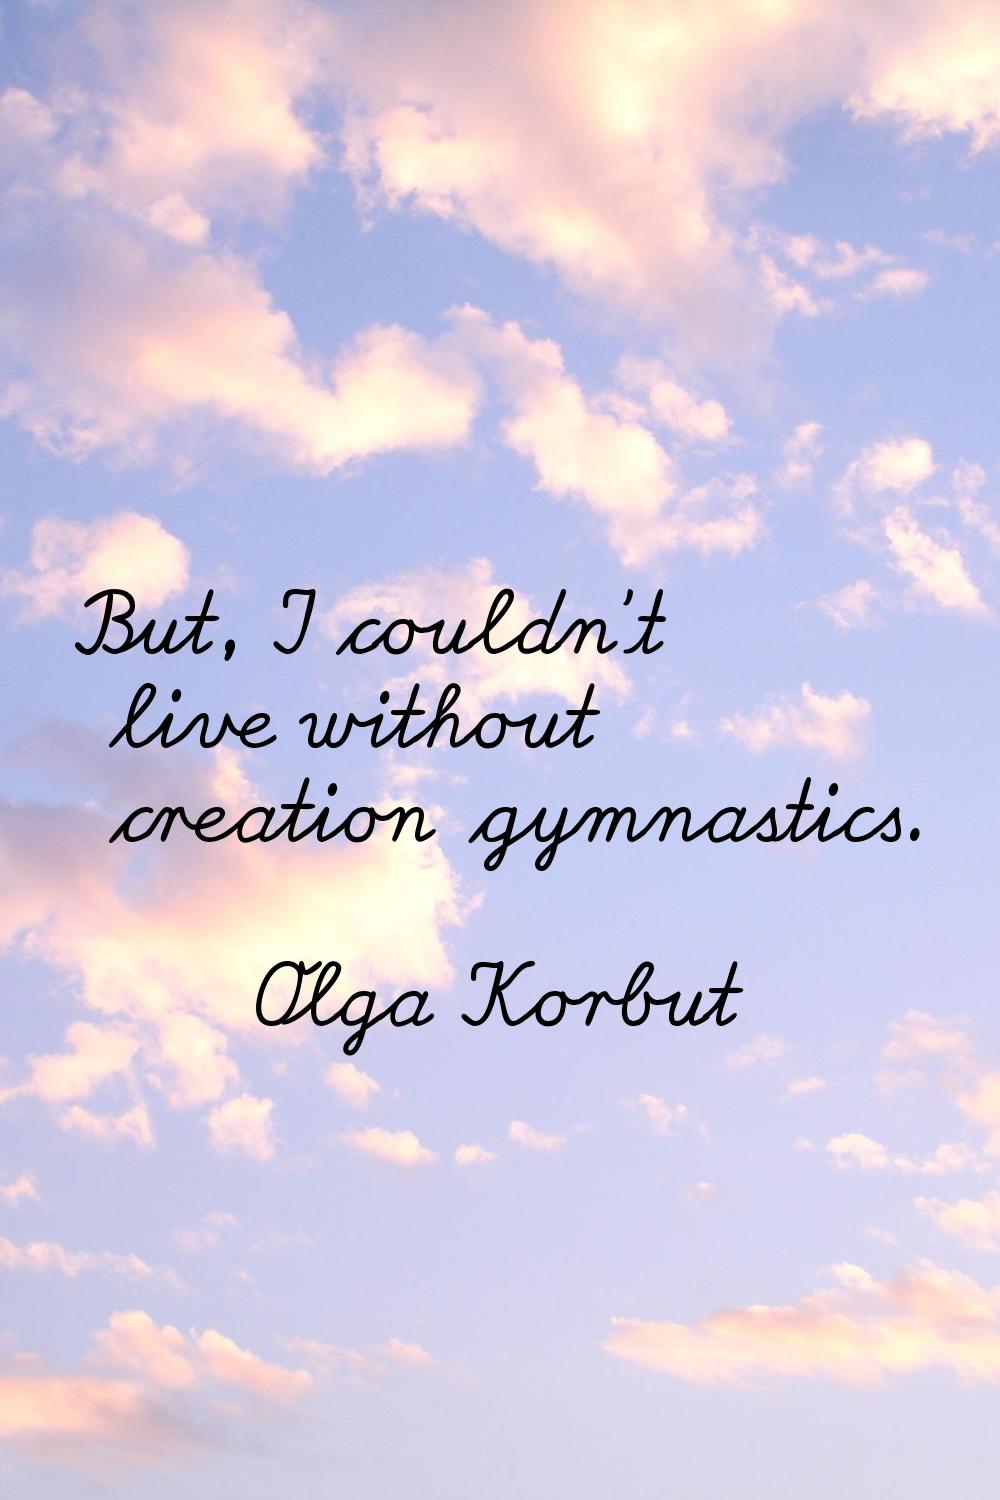 But, I couldn't live without creation gymnastics.